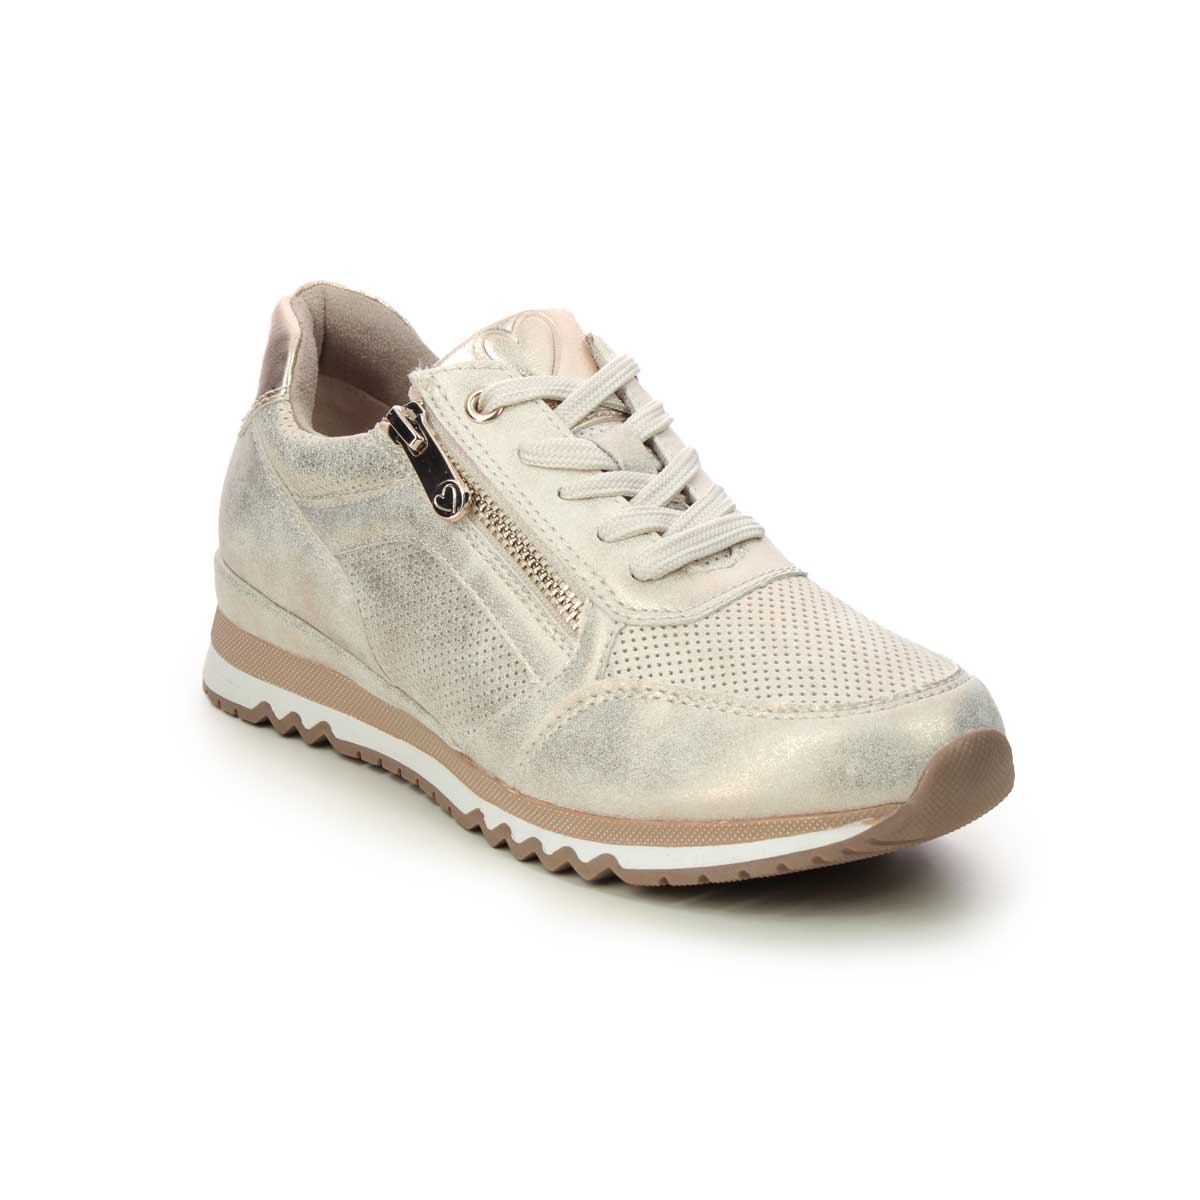 Marco Tozzi Bonallo Cork Light Gold Womens trainers 23782-41-447 in a Plain Man-made in Size 36